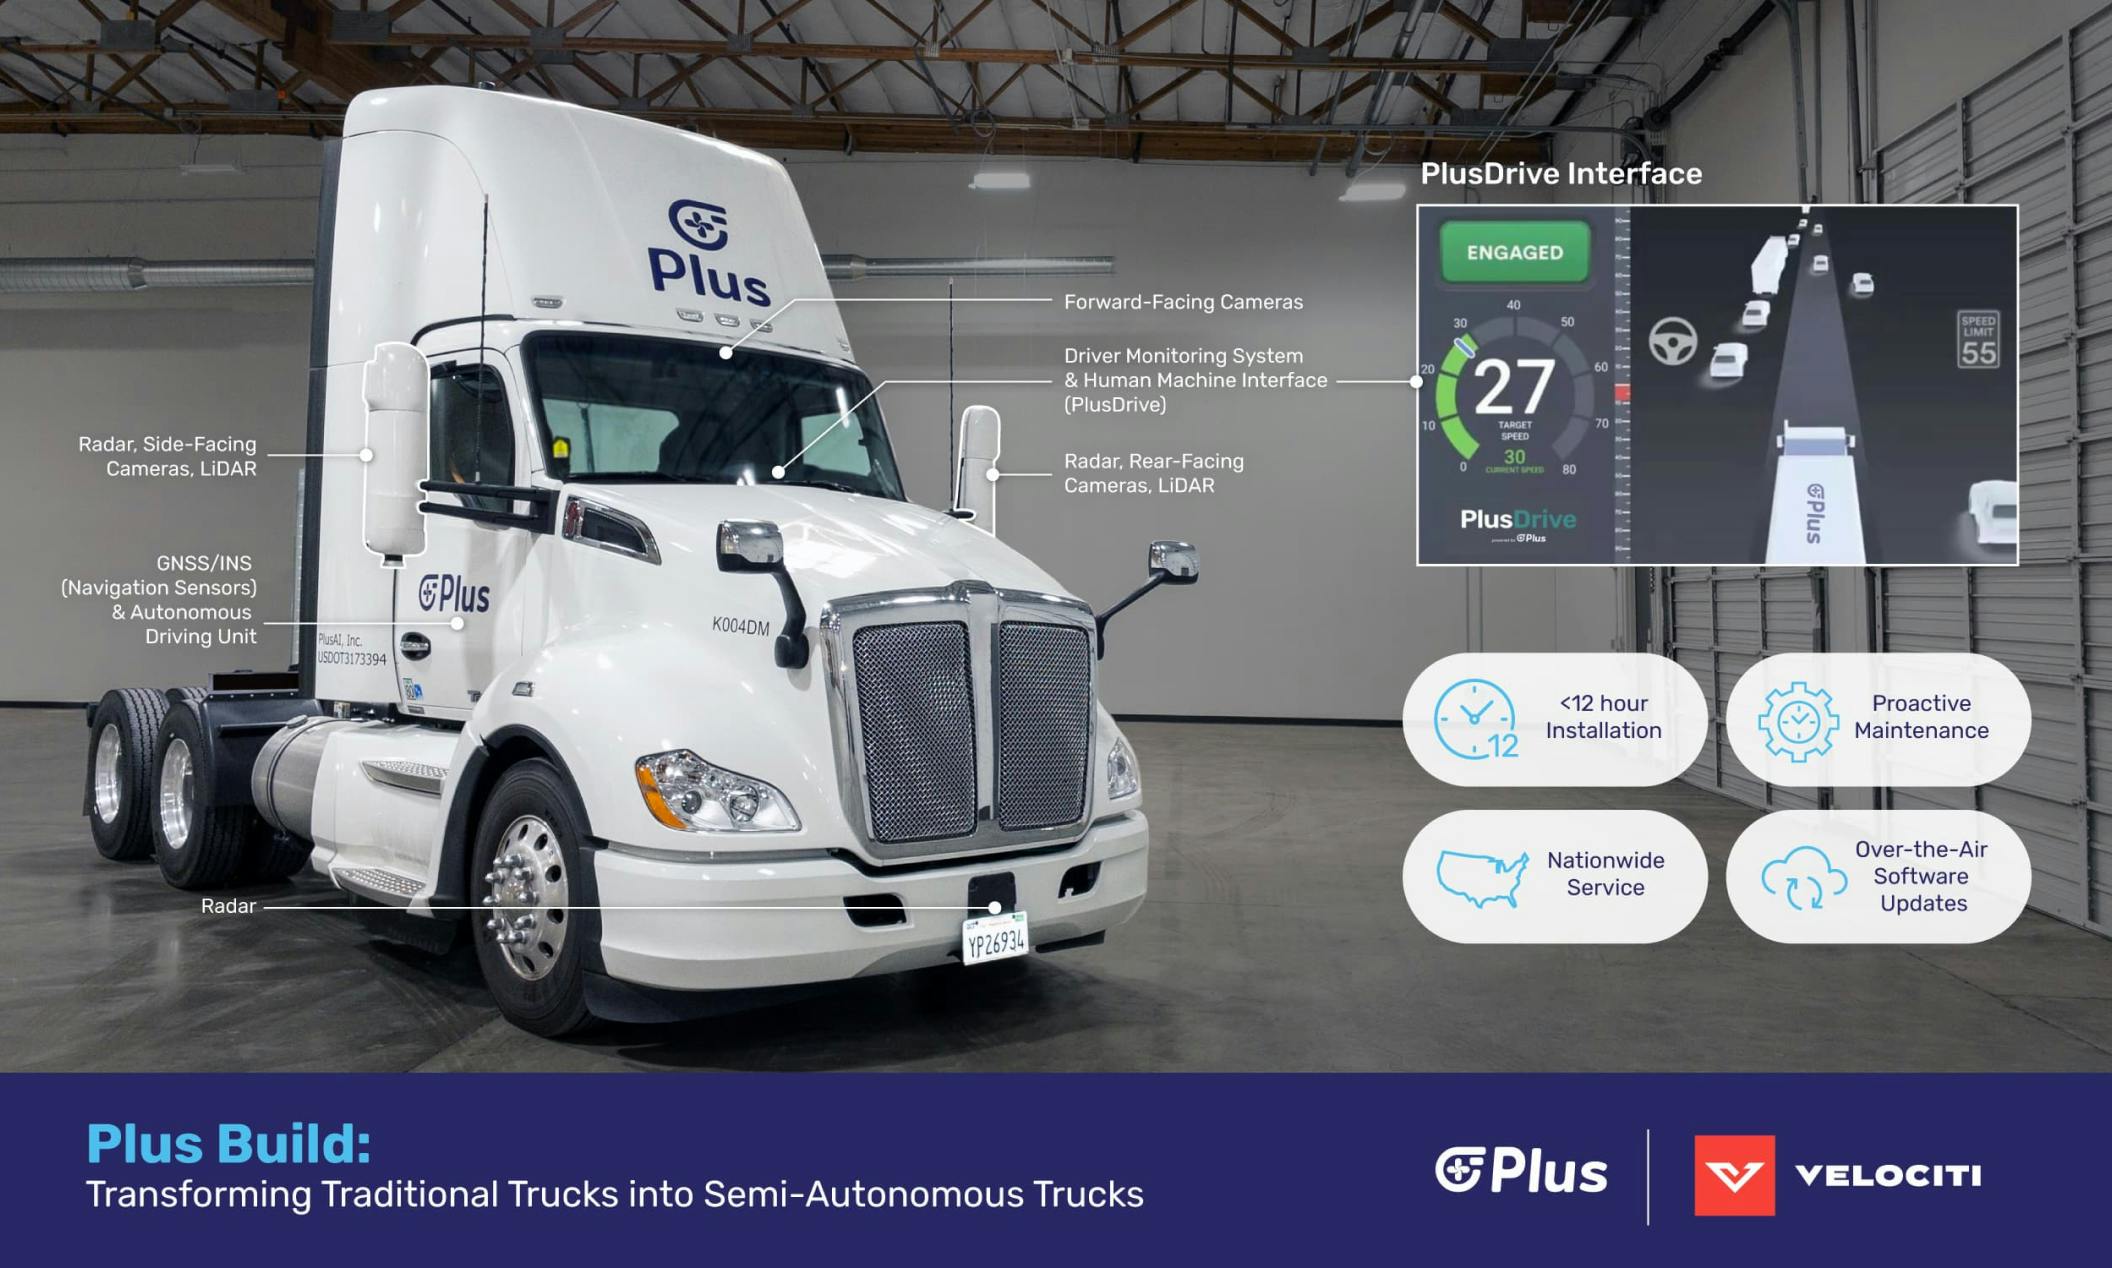 Plus Build program takes less than a day to turn new and existing Class 8 freight trucks into semi-autonomous trucks